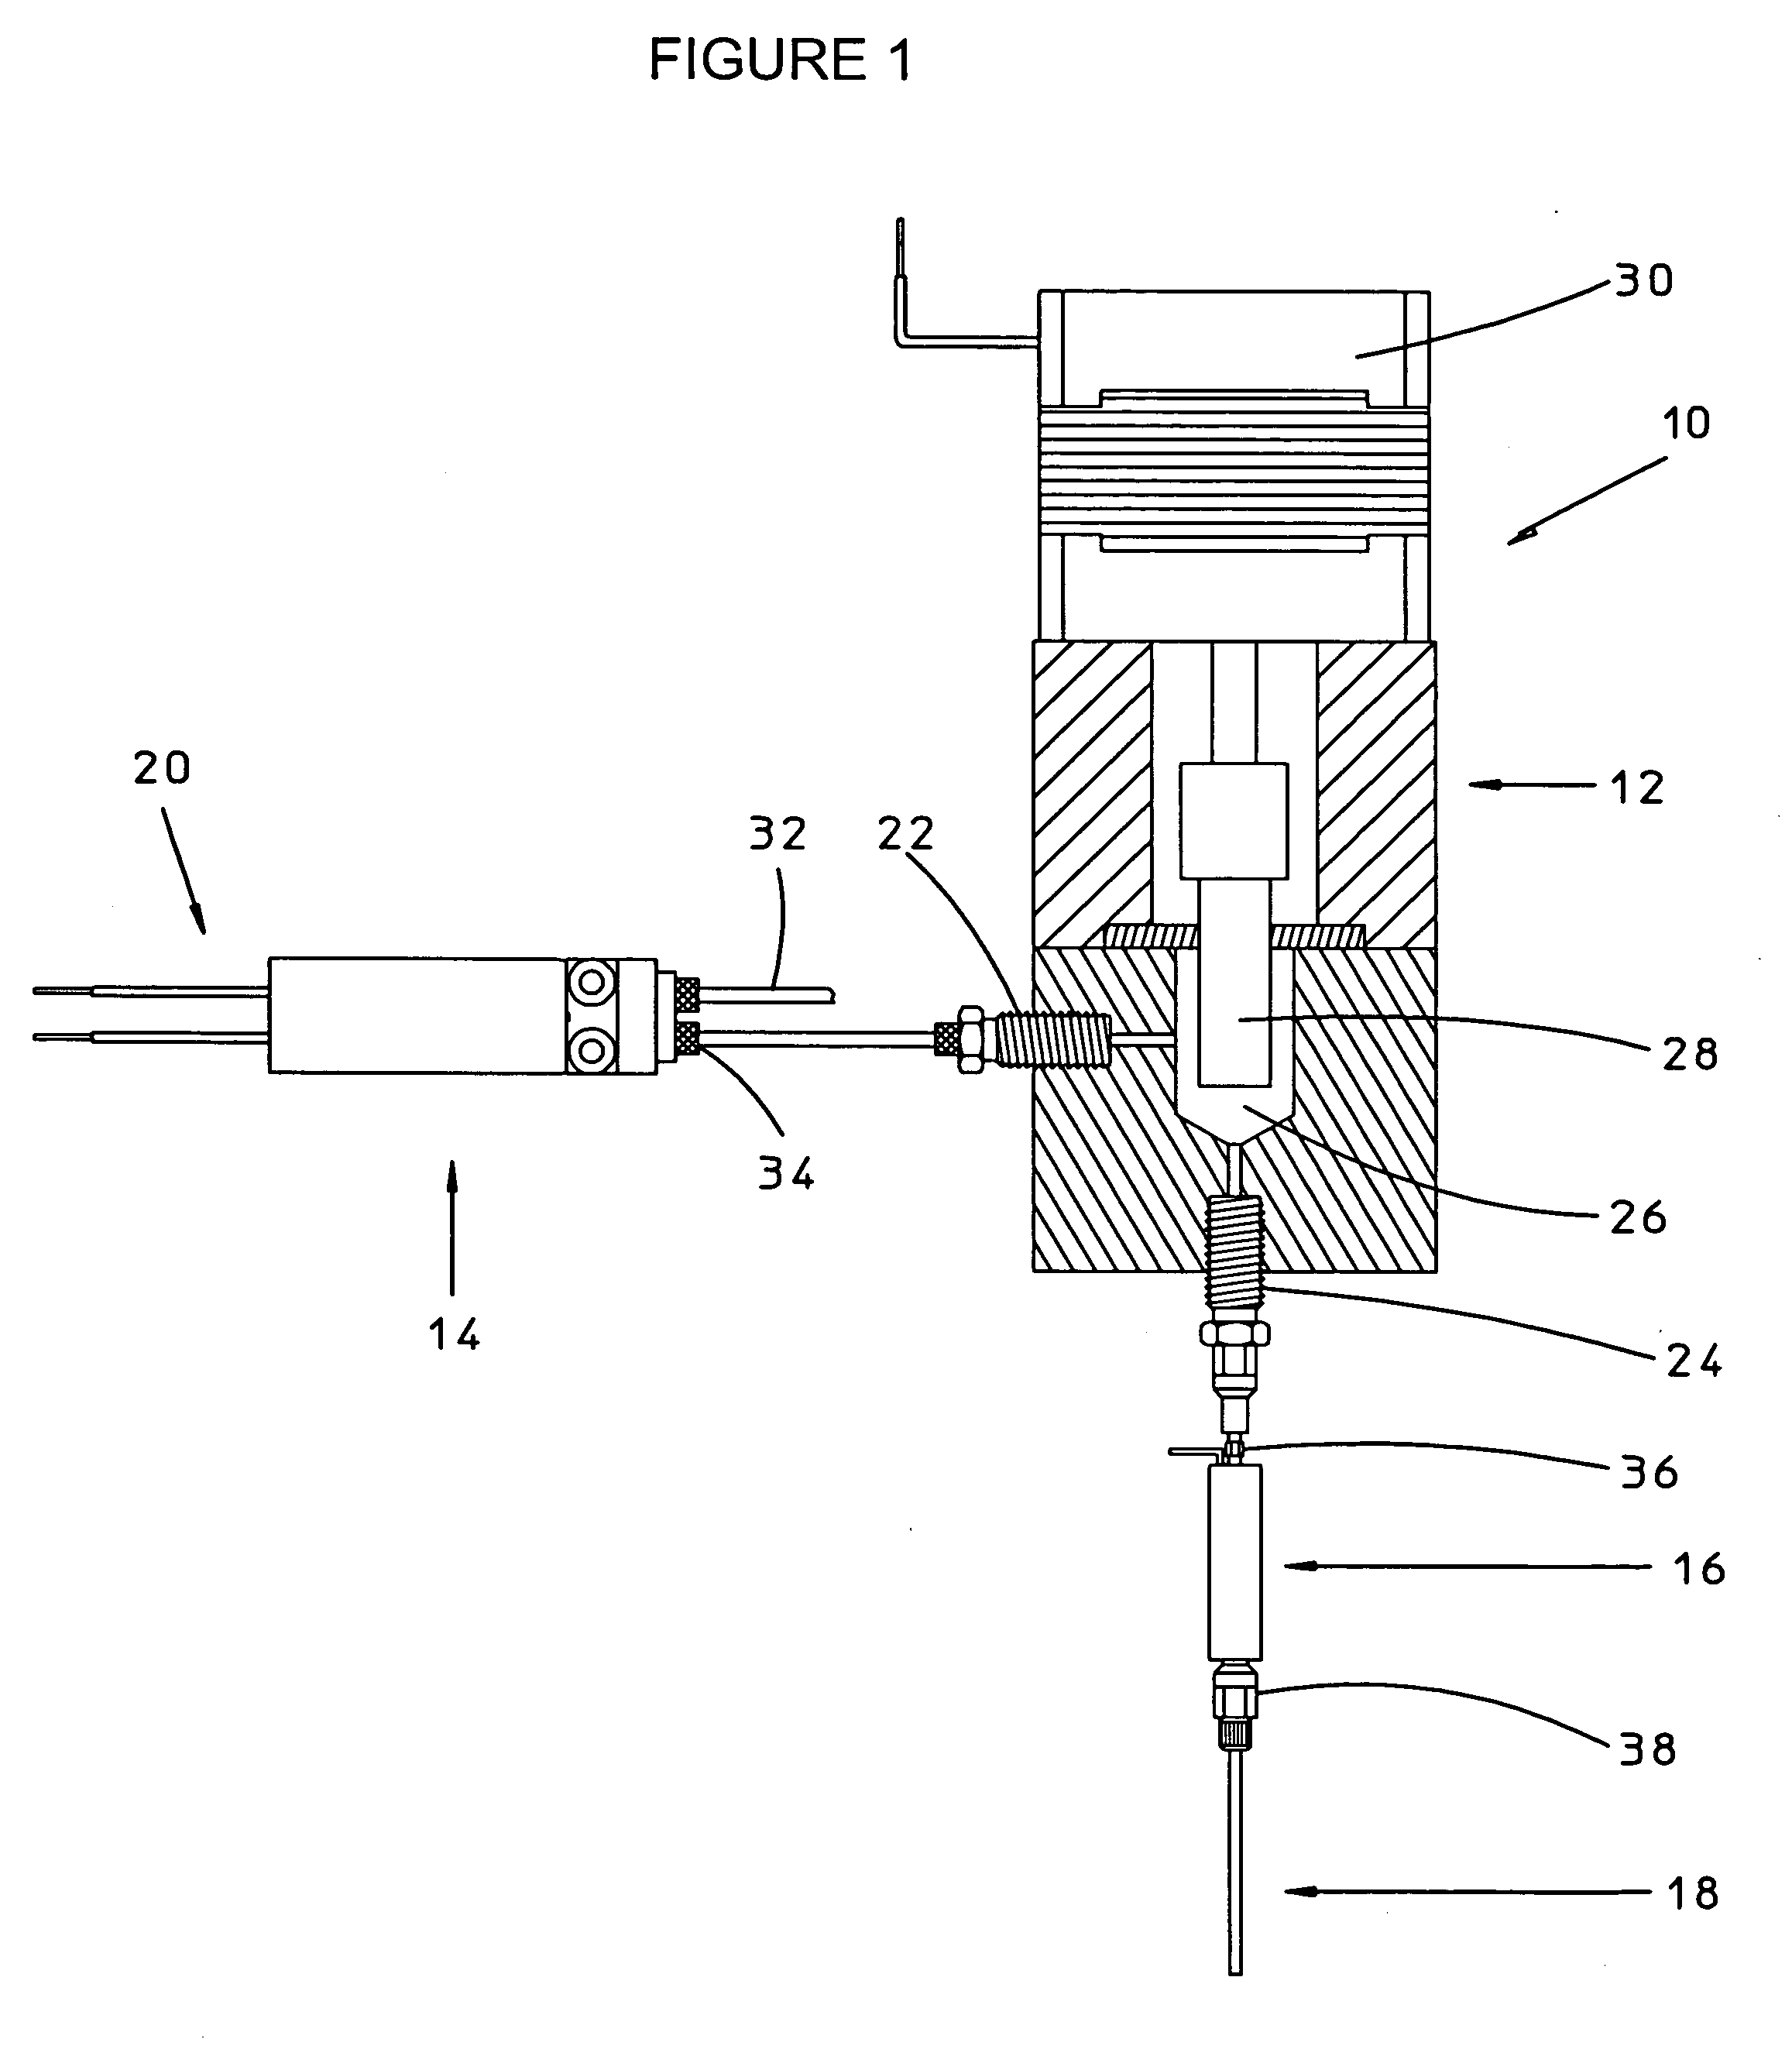 Method and apparatus for dispensing small volumes of fluid